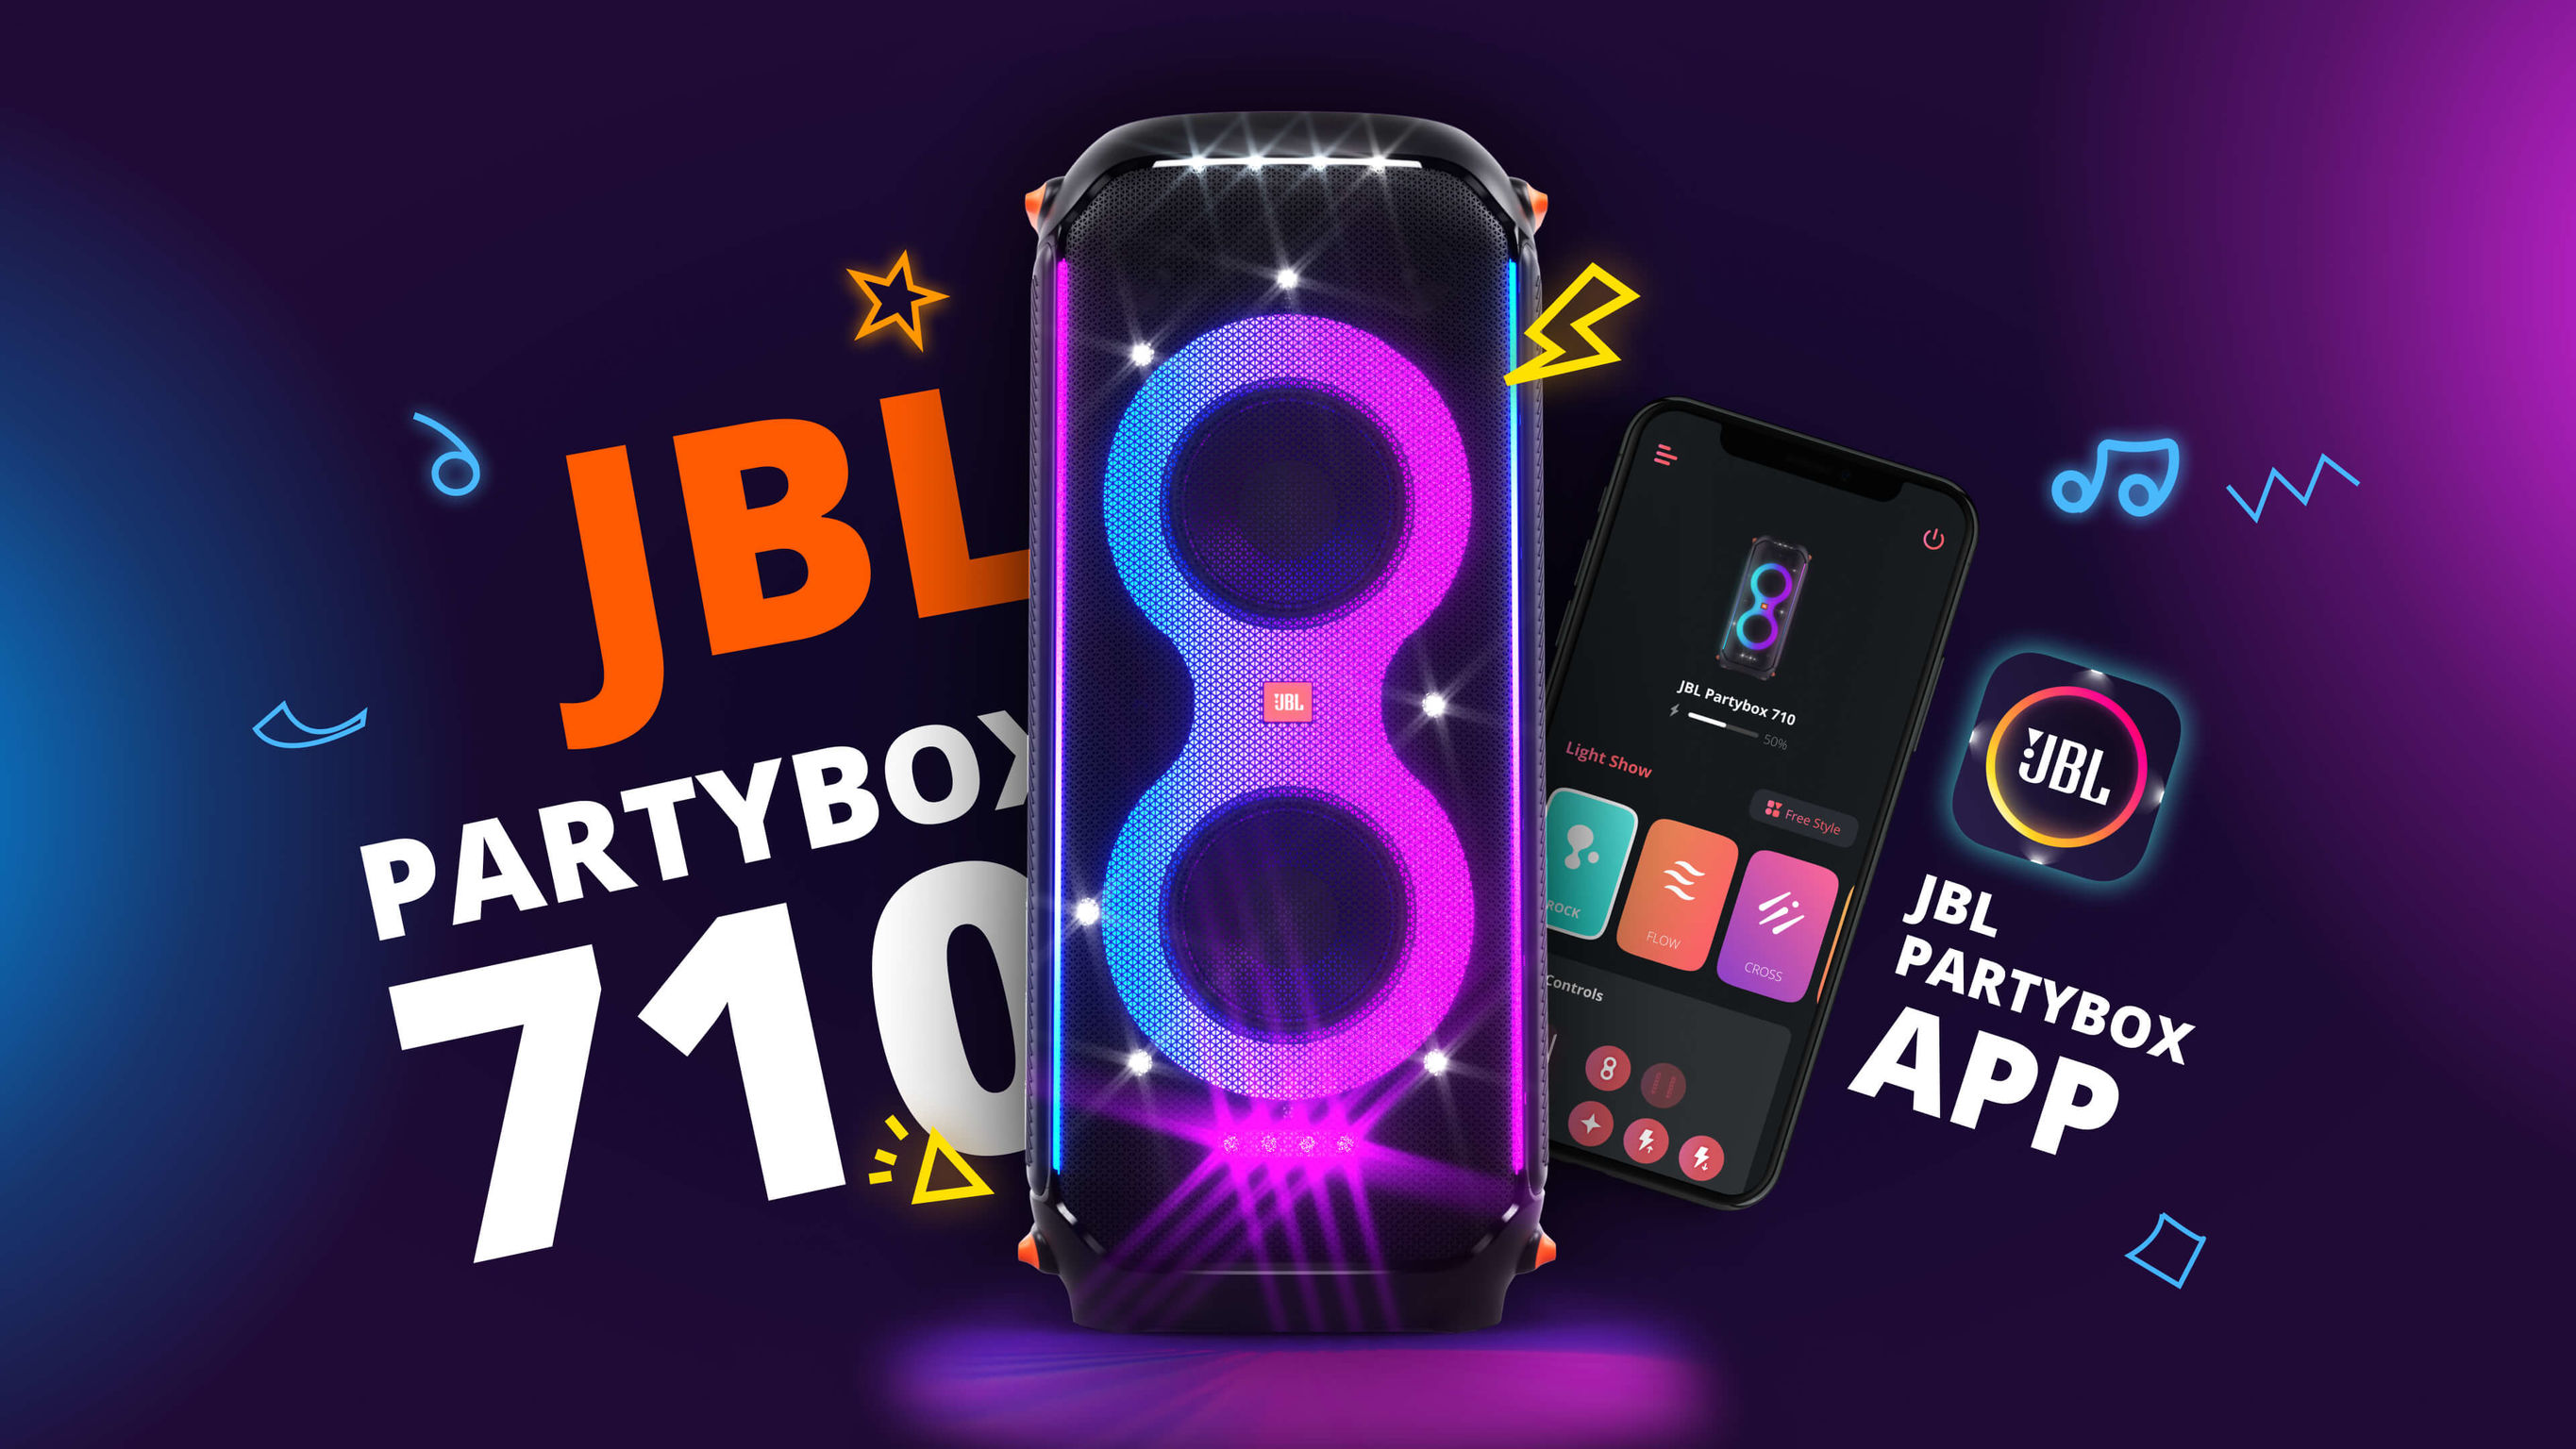 JBL Partybox 710 product experience